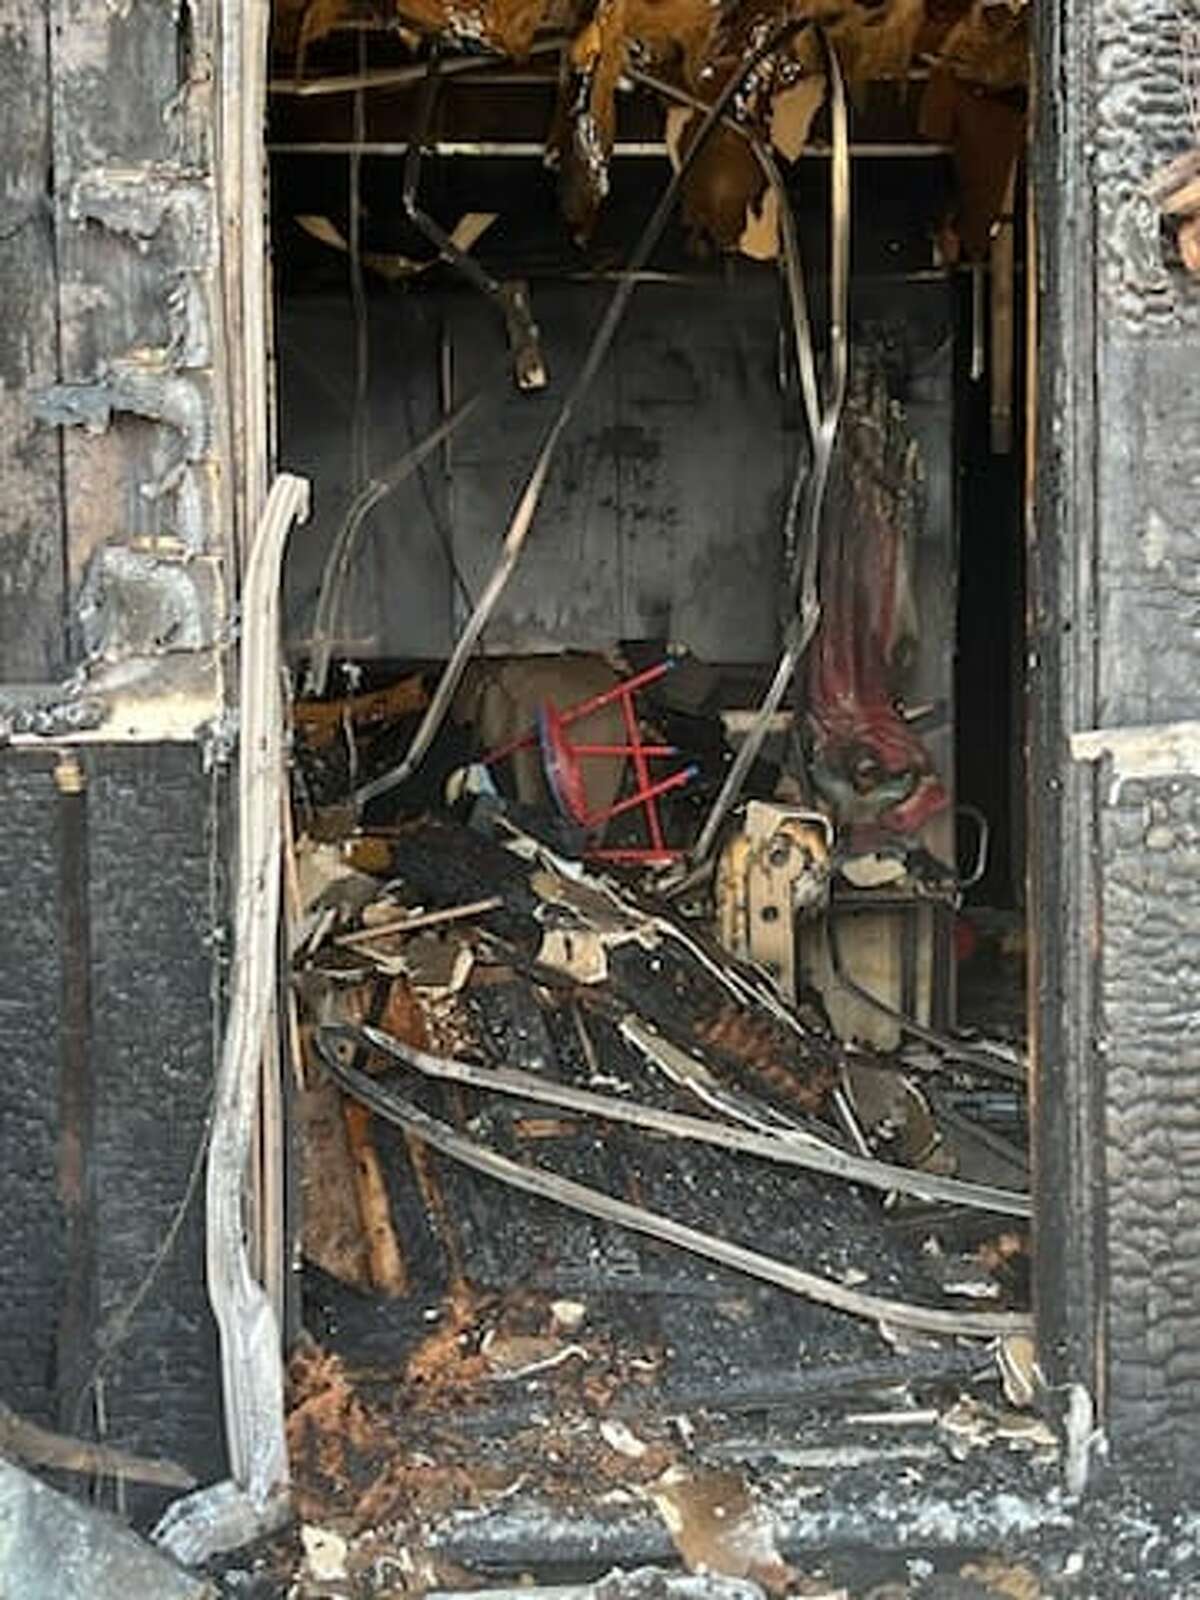 A Laredo family of five saw their residence burned down on Sunday, March 26, 2023. The Laredo Fire Department deemed the home "uninhabitable" after the fire.